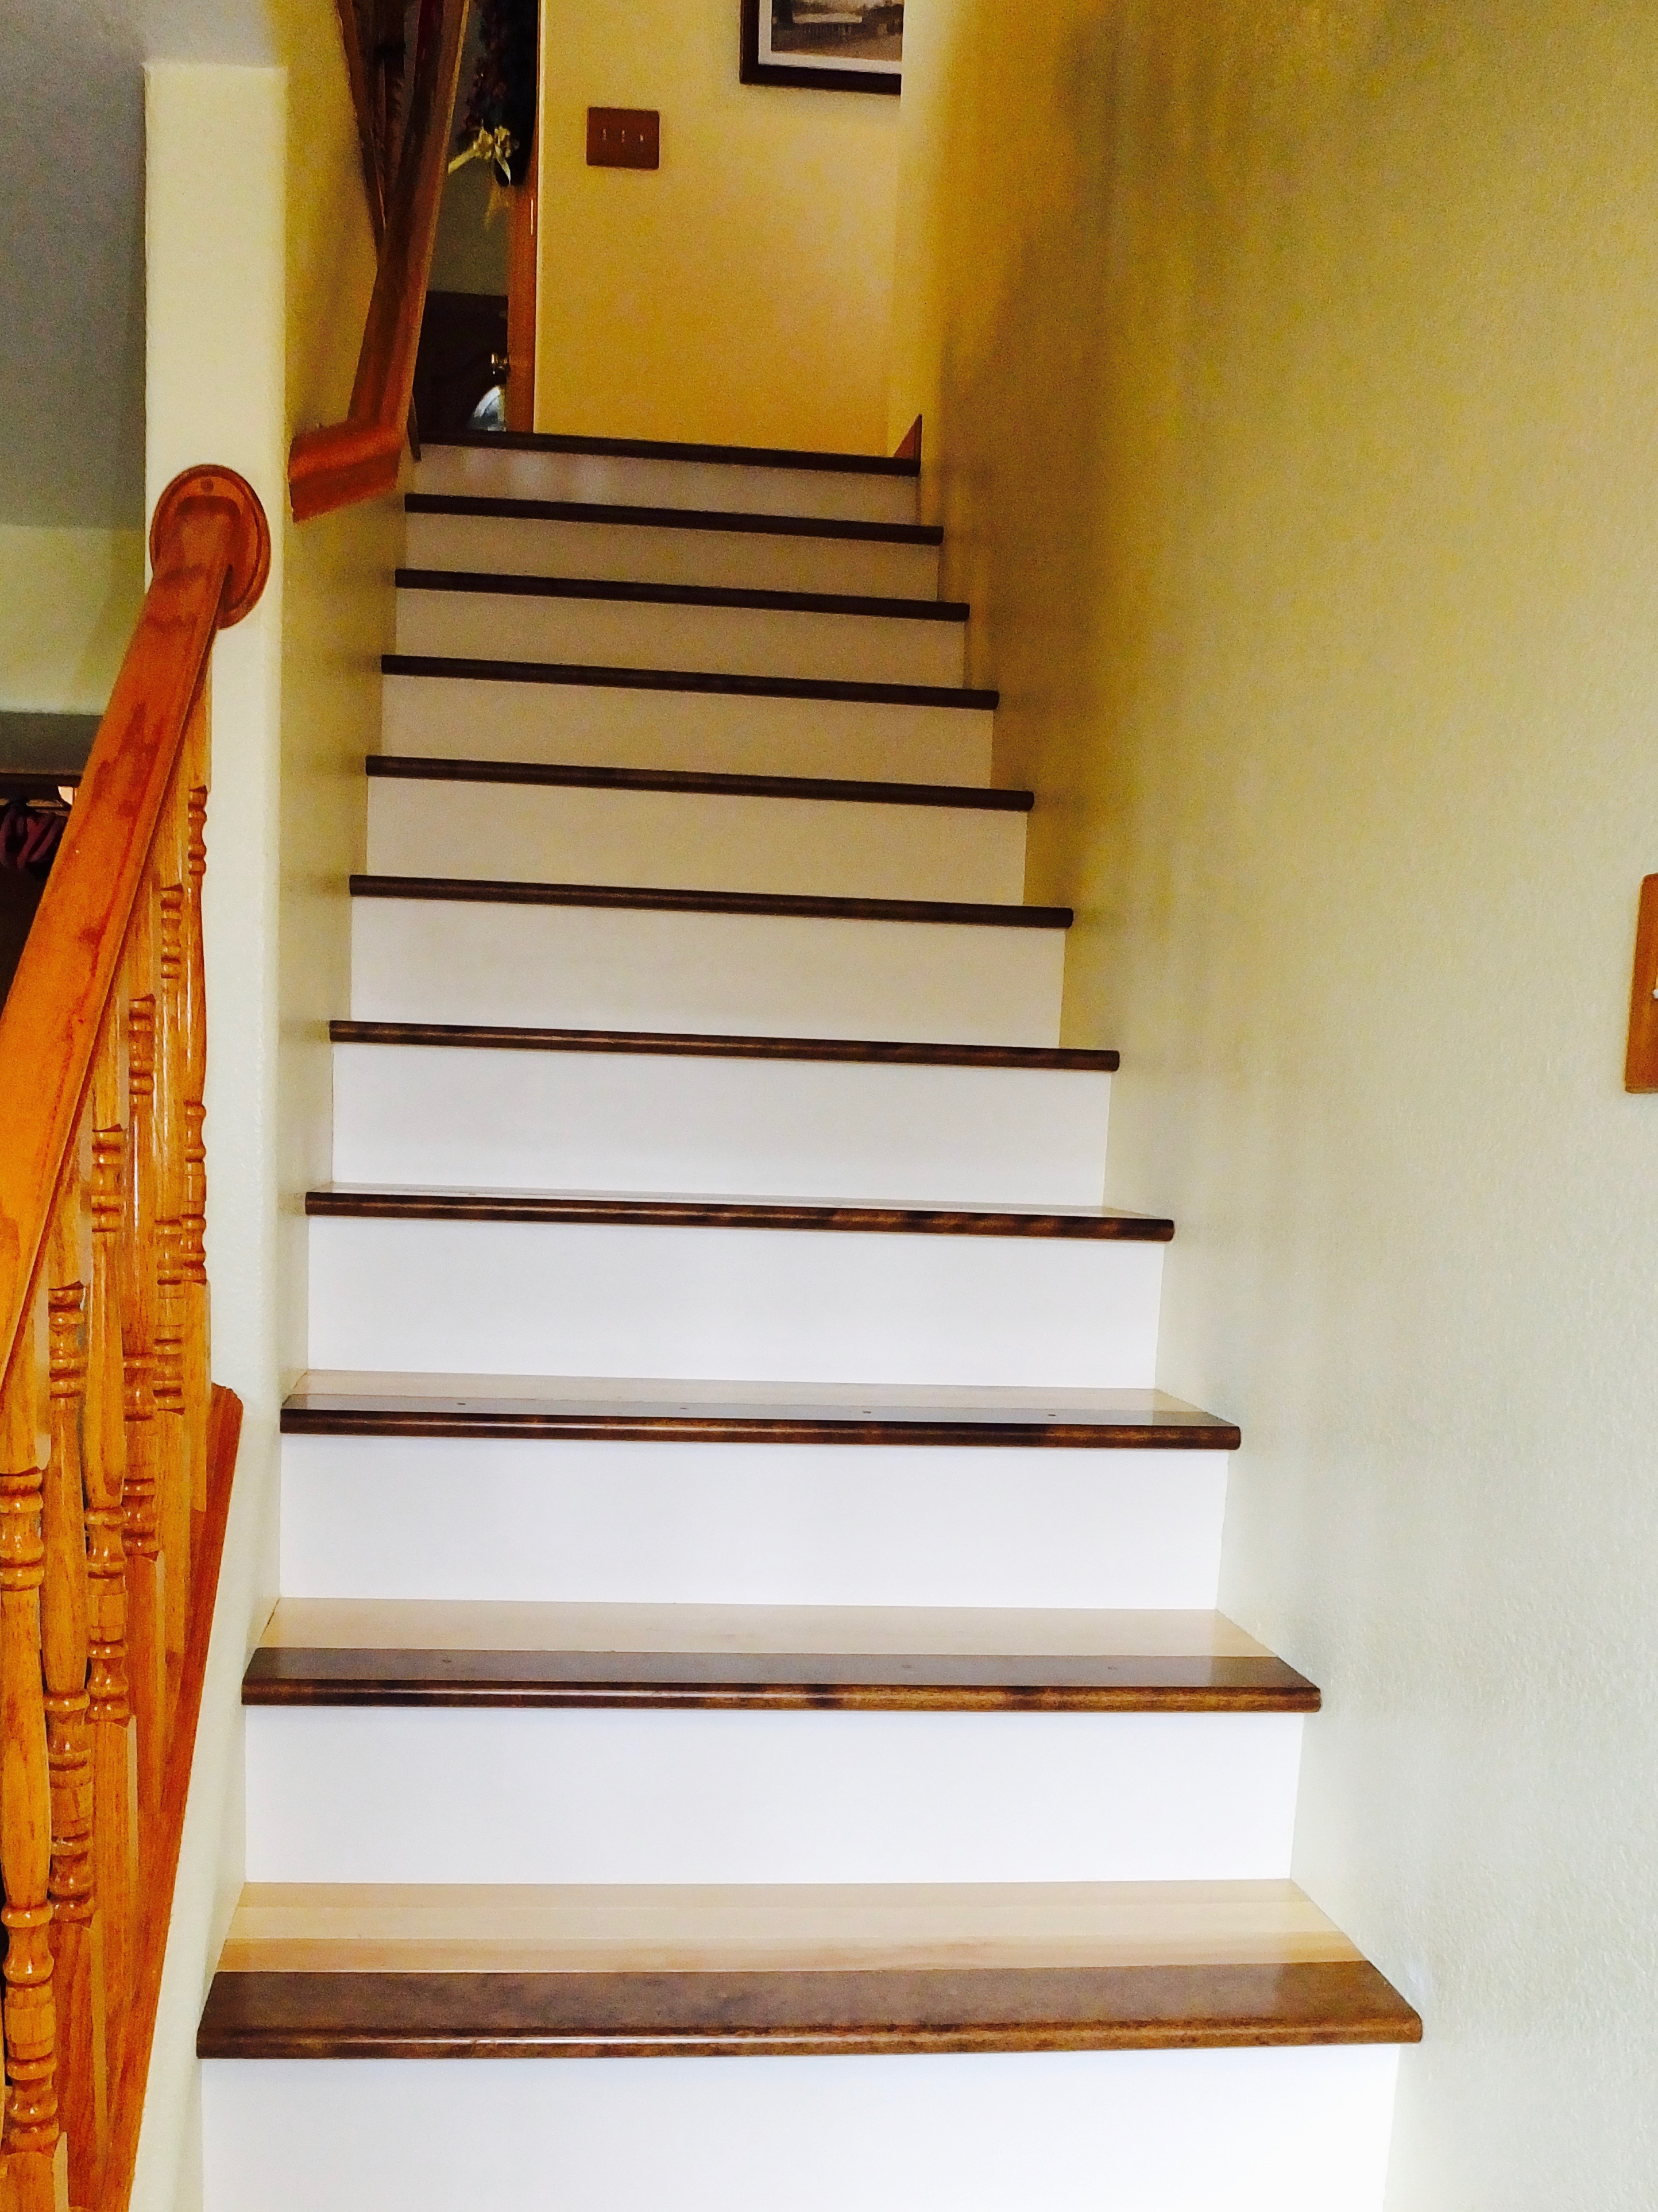 How To Update Carpeted Stairs Into A Wooden Staircase - Countryesque